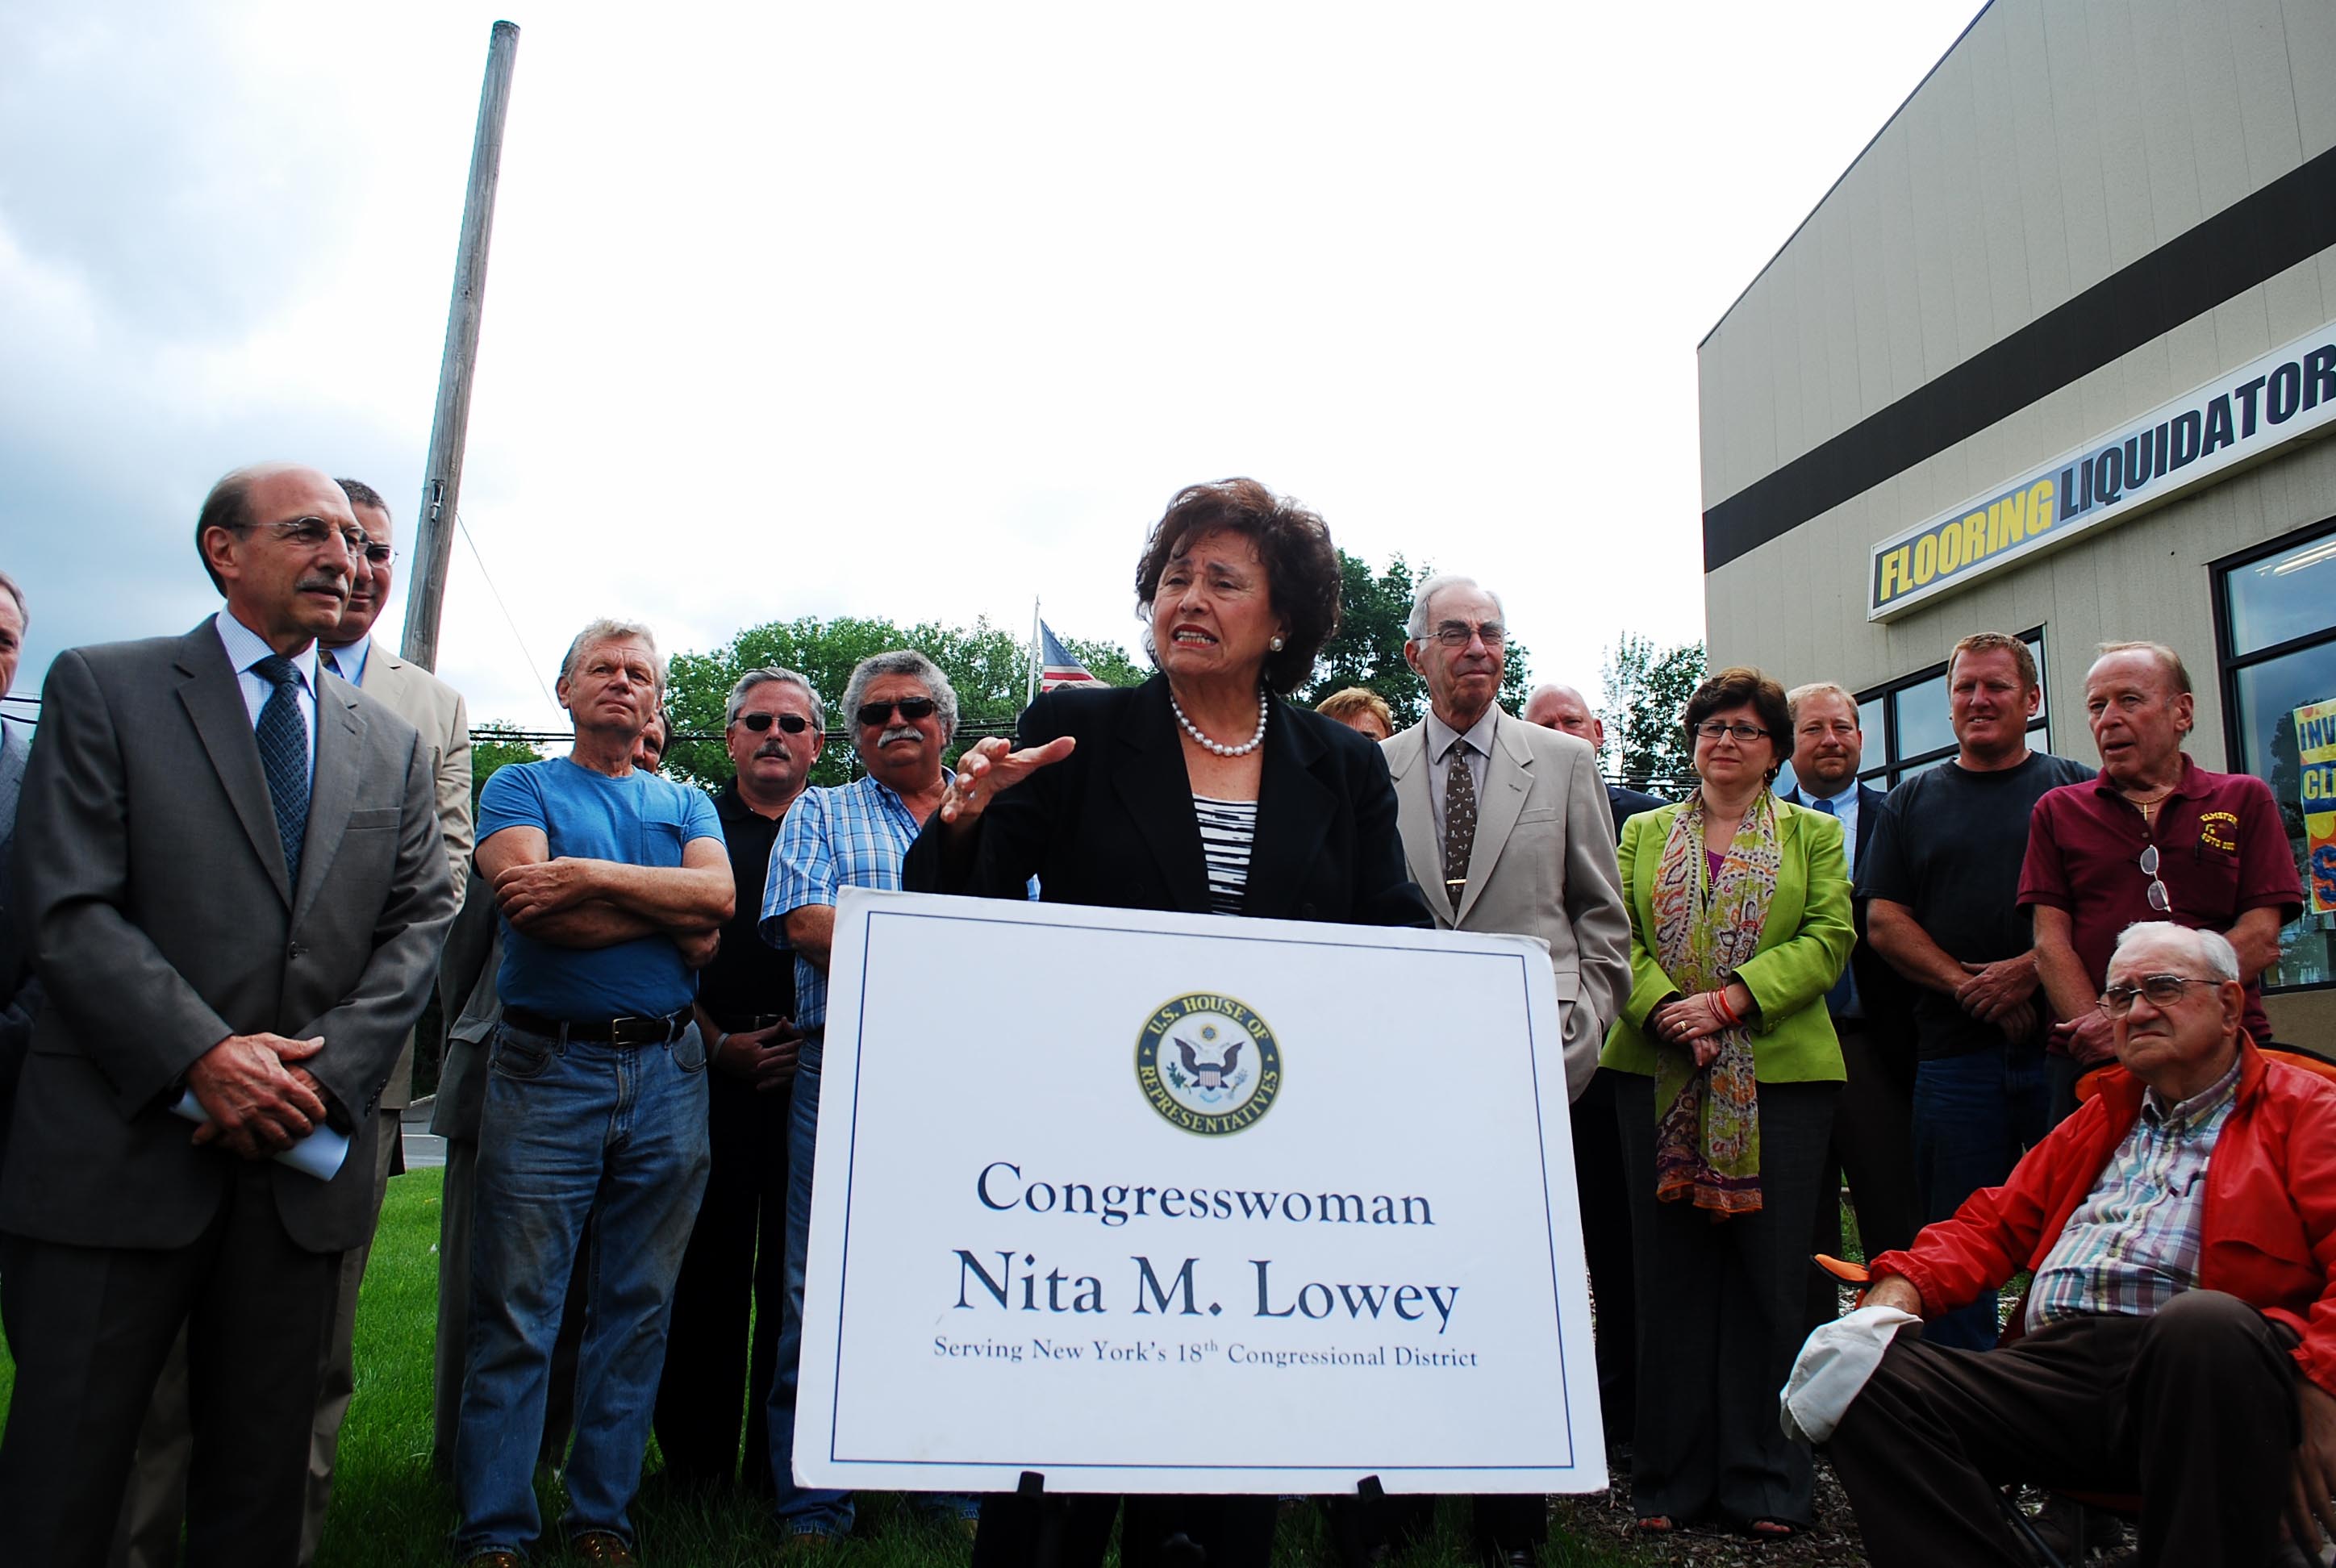 Rep. Nita Lowey was joined by local officials and leaders from the construction industry in Elmsford Thursday, as she called on Congress to reauthorize federal transportation programs.